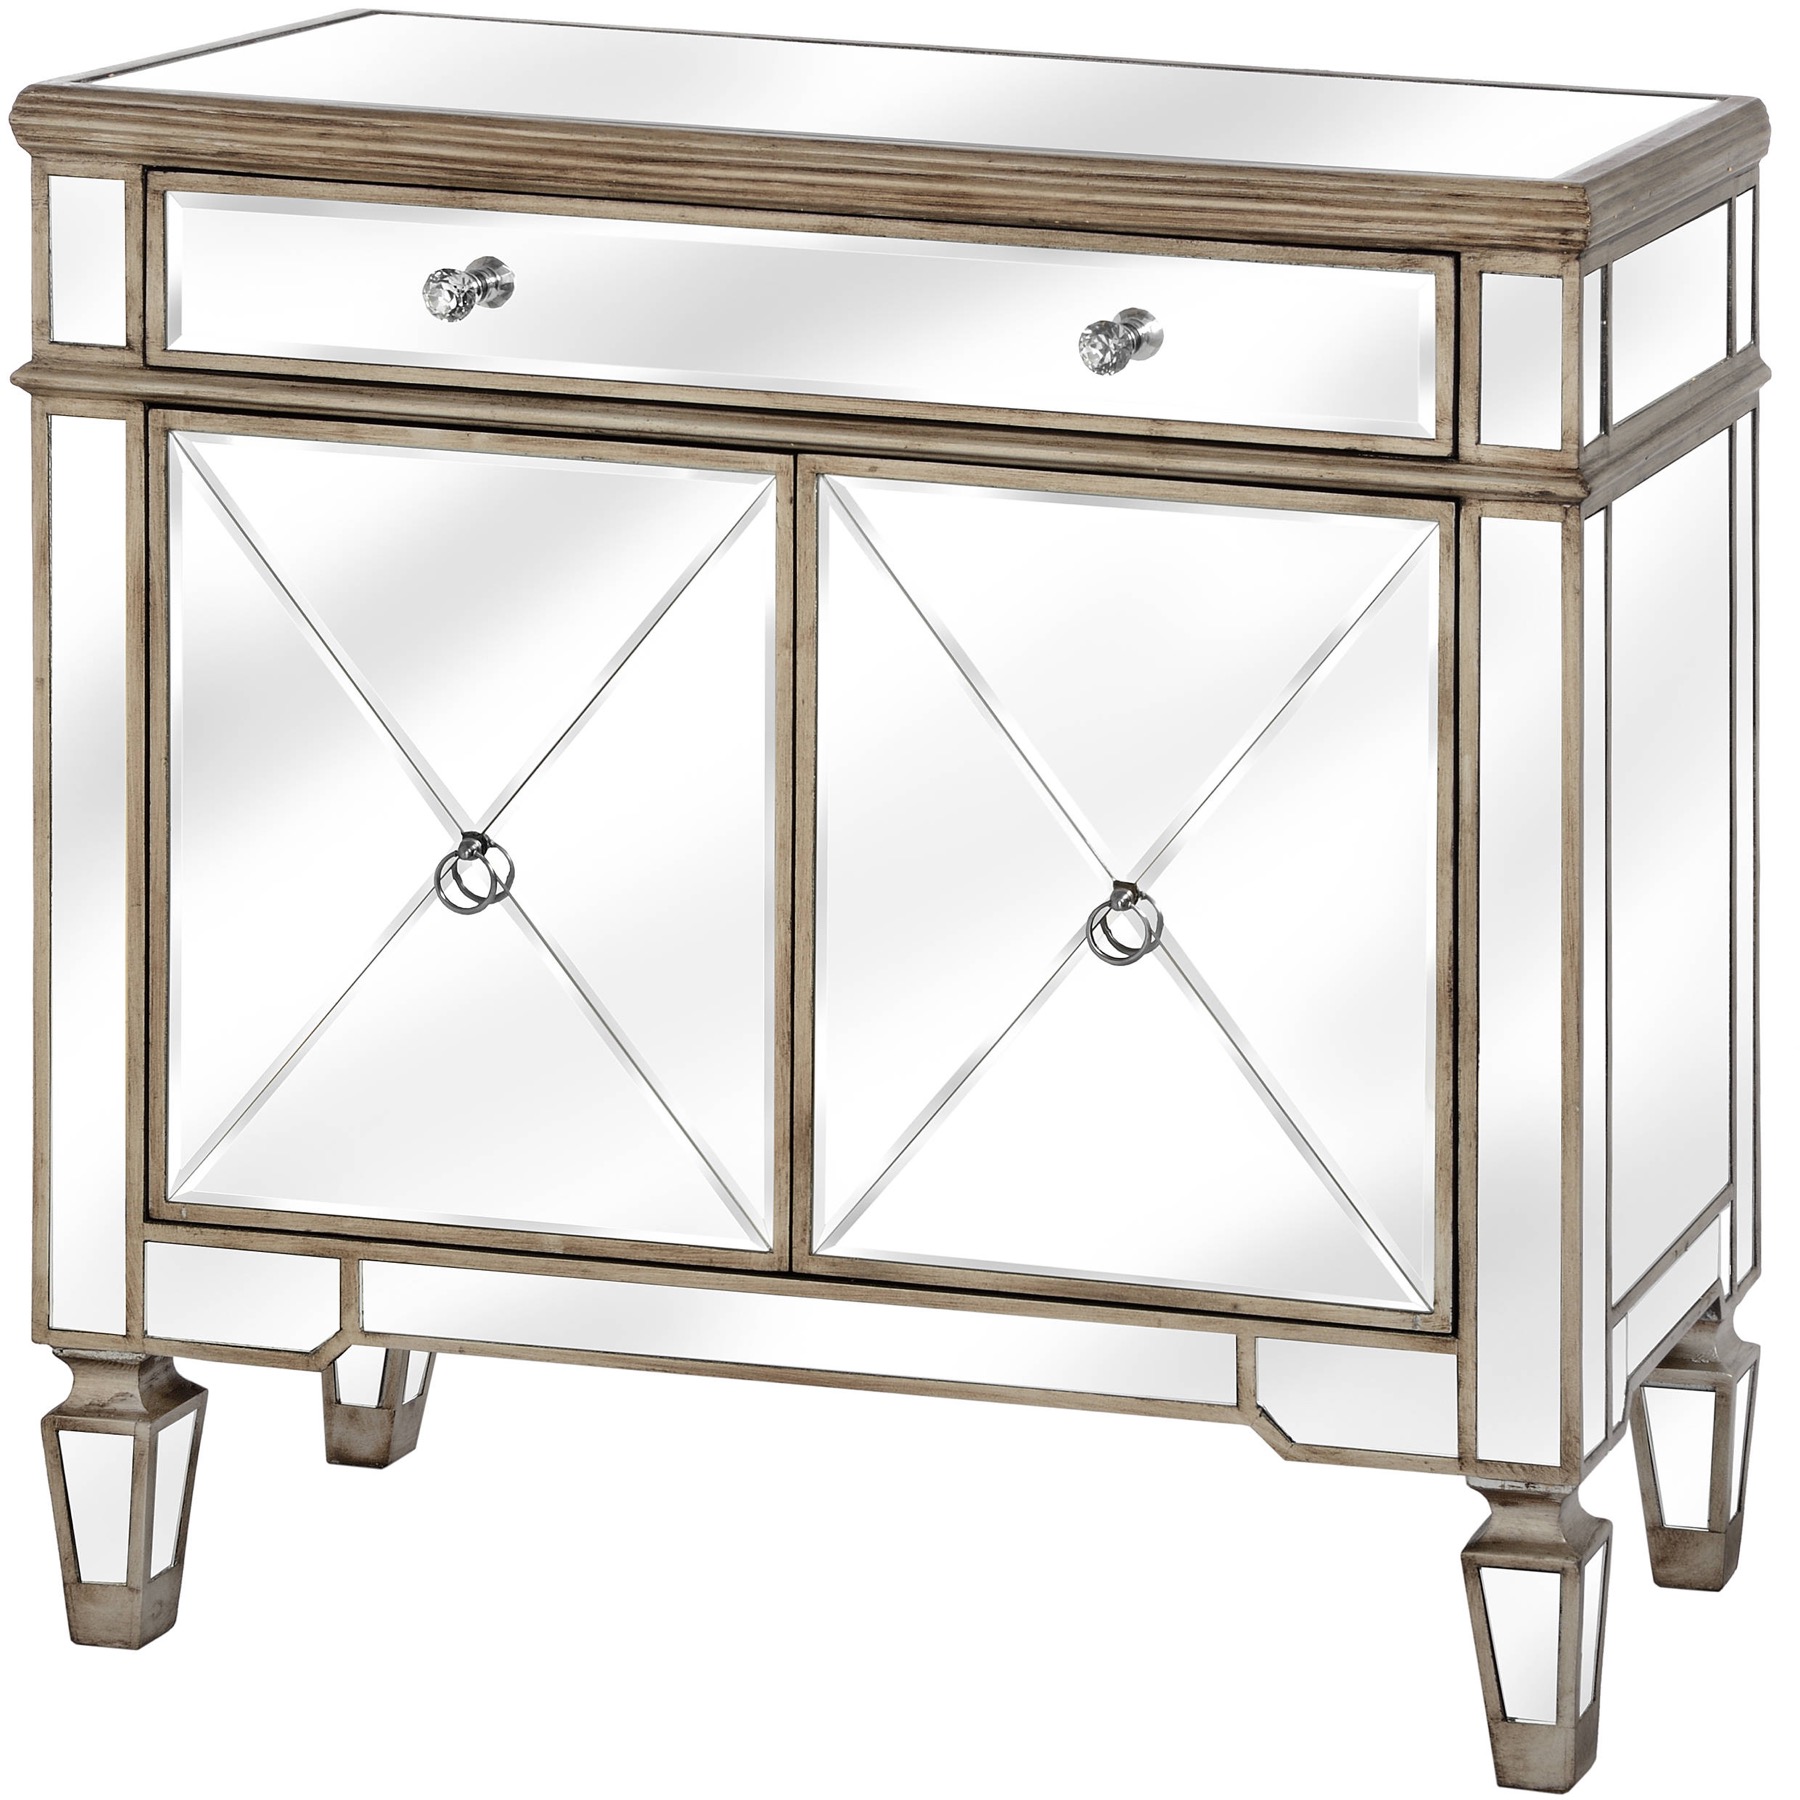 The Belfry Collection One Drawer Two Door Mirrored Cupboard - Image 1